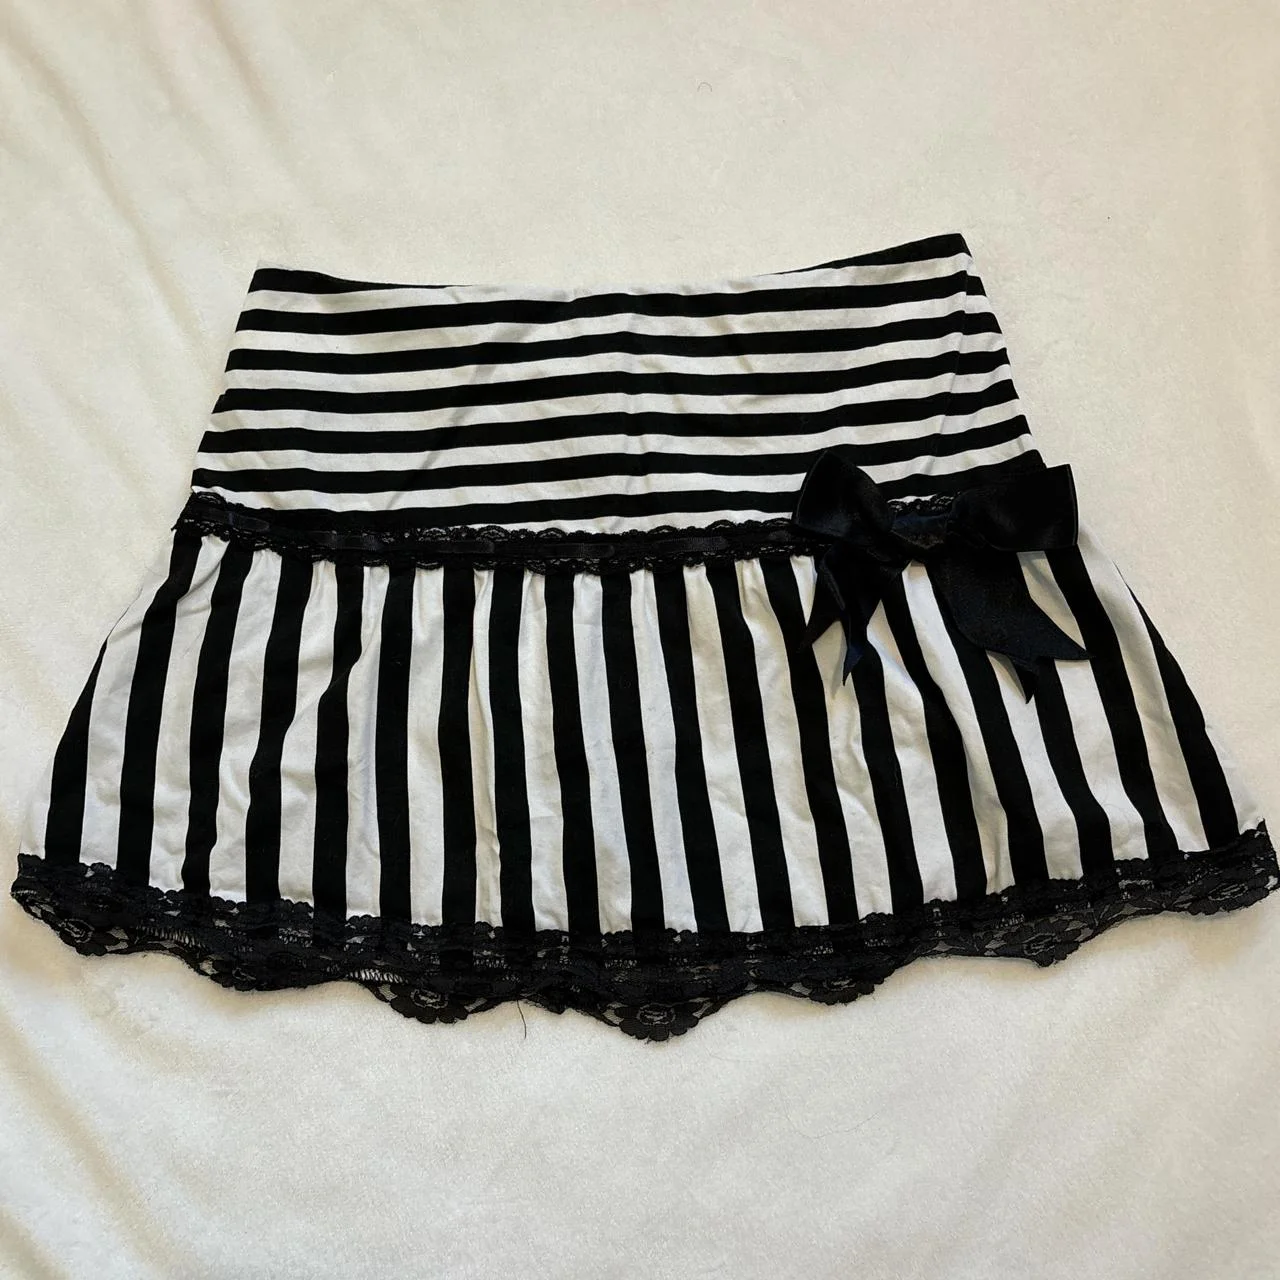 

Punk Y2k Skirts Women Clothes Goth Sexy Ropa Aesthetic Stripe High Waist Lace Bow MIni Skirts Grunge Emo Girl 2000s Short Skirt